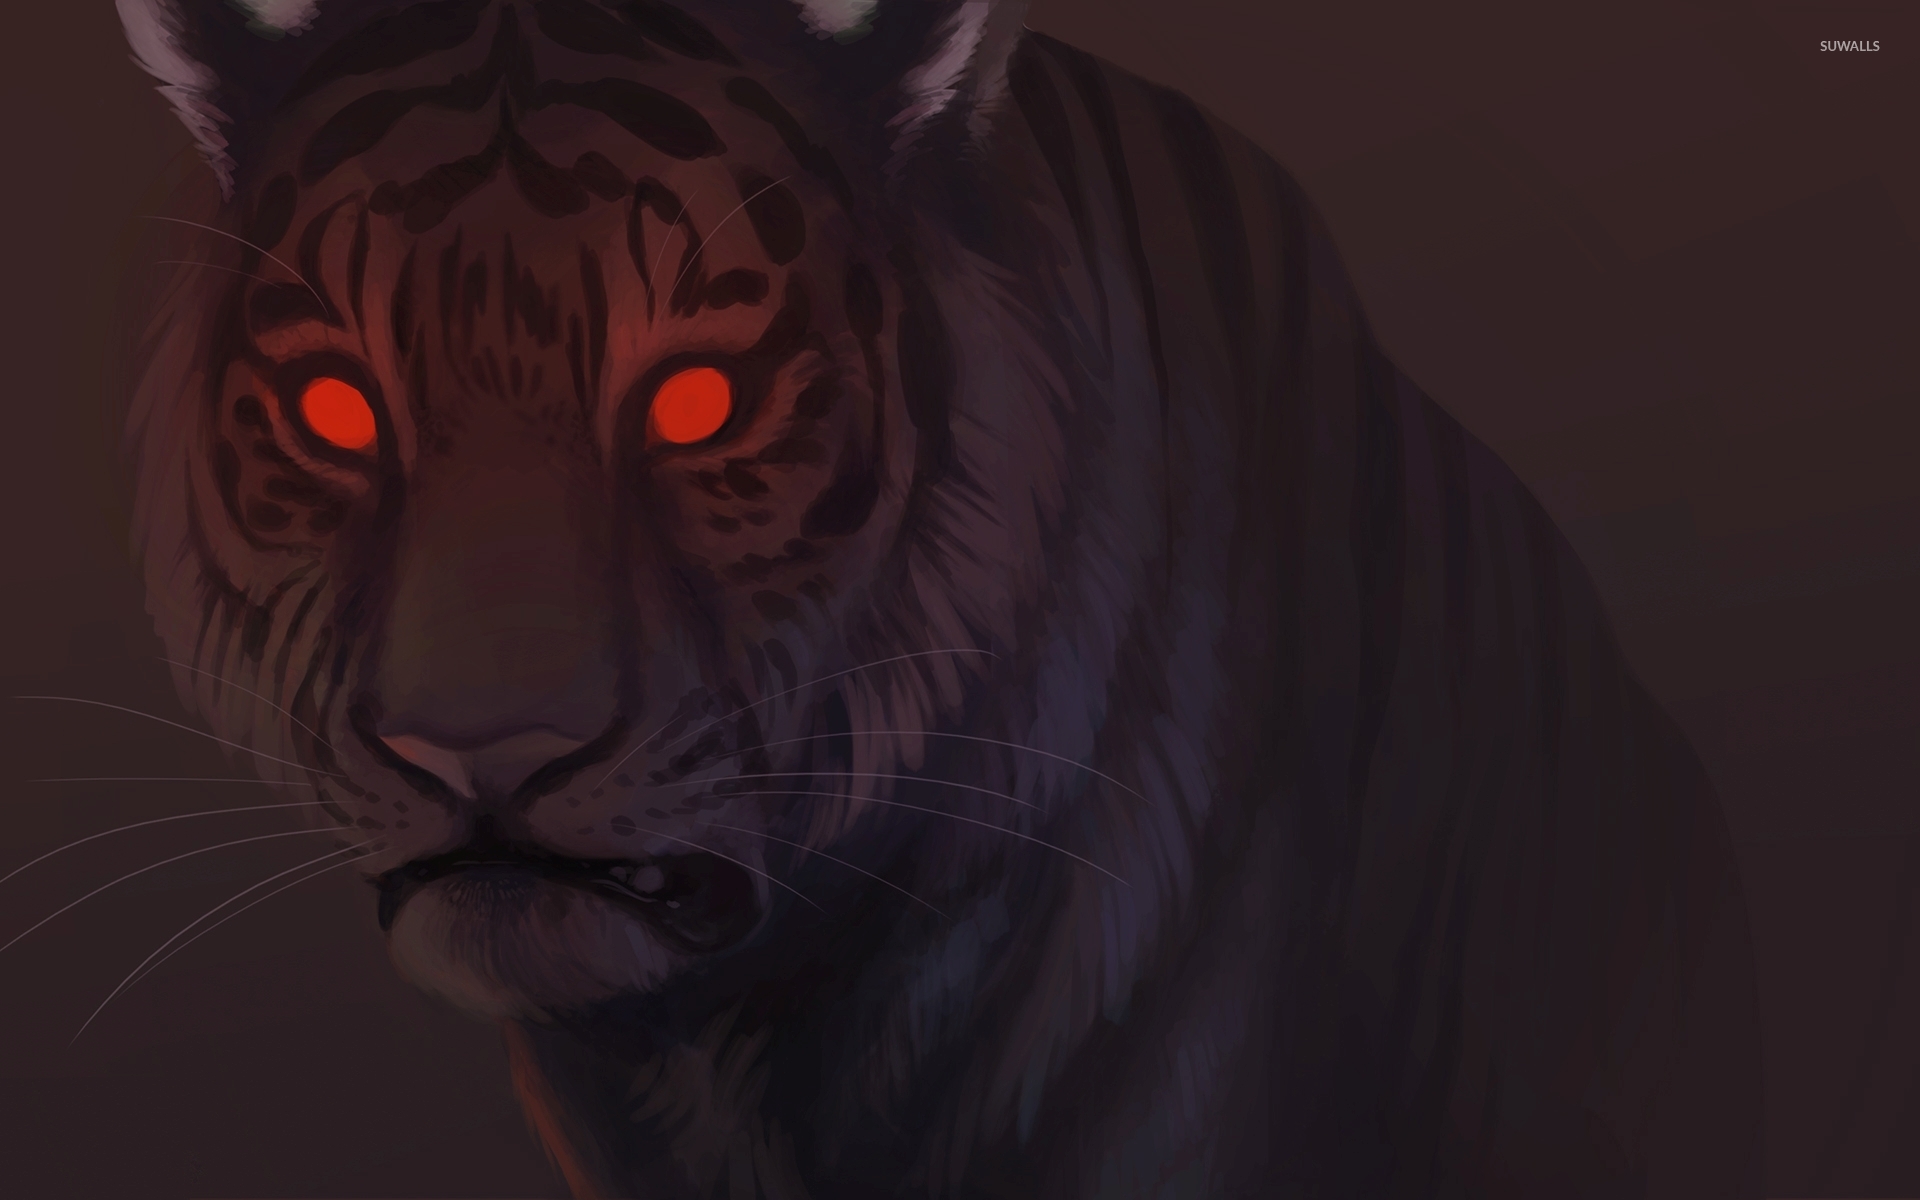 Tiger with red eyes wallpaper   Digital Art wallpapers